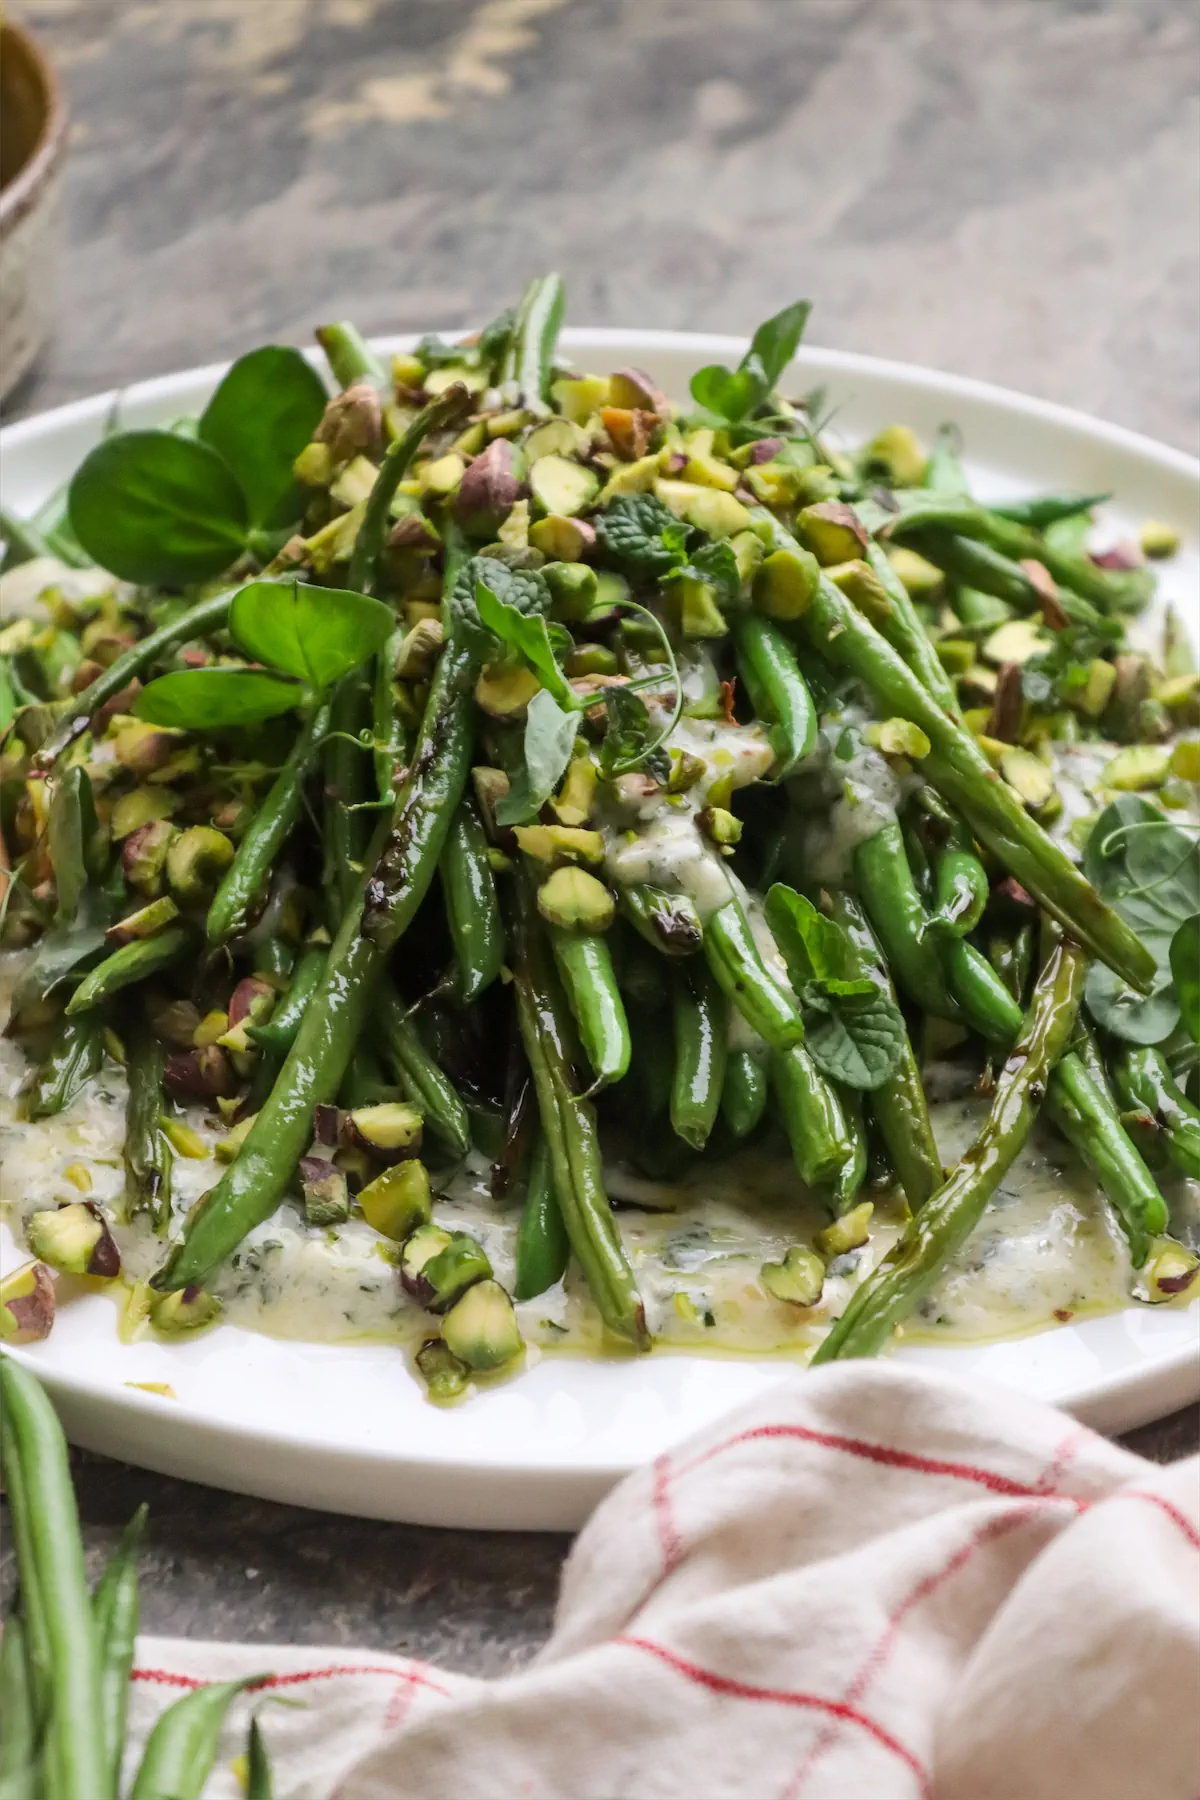 Low-carb grilled green bean salad with yogurt and mint-dressing topped with pistachios on a plate.